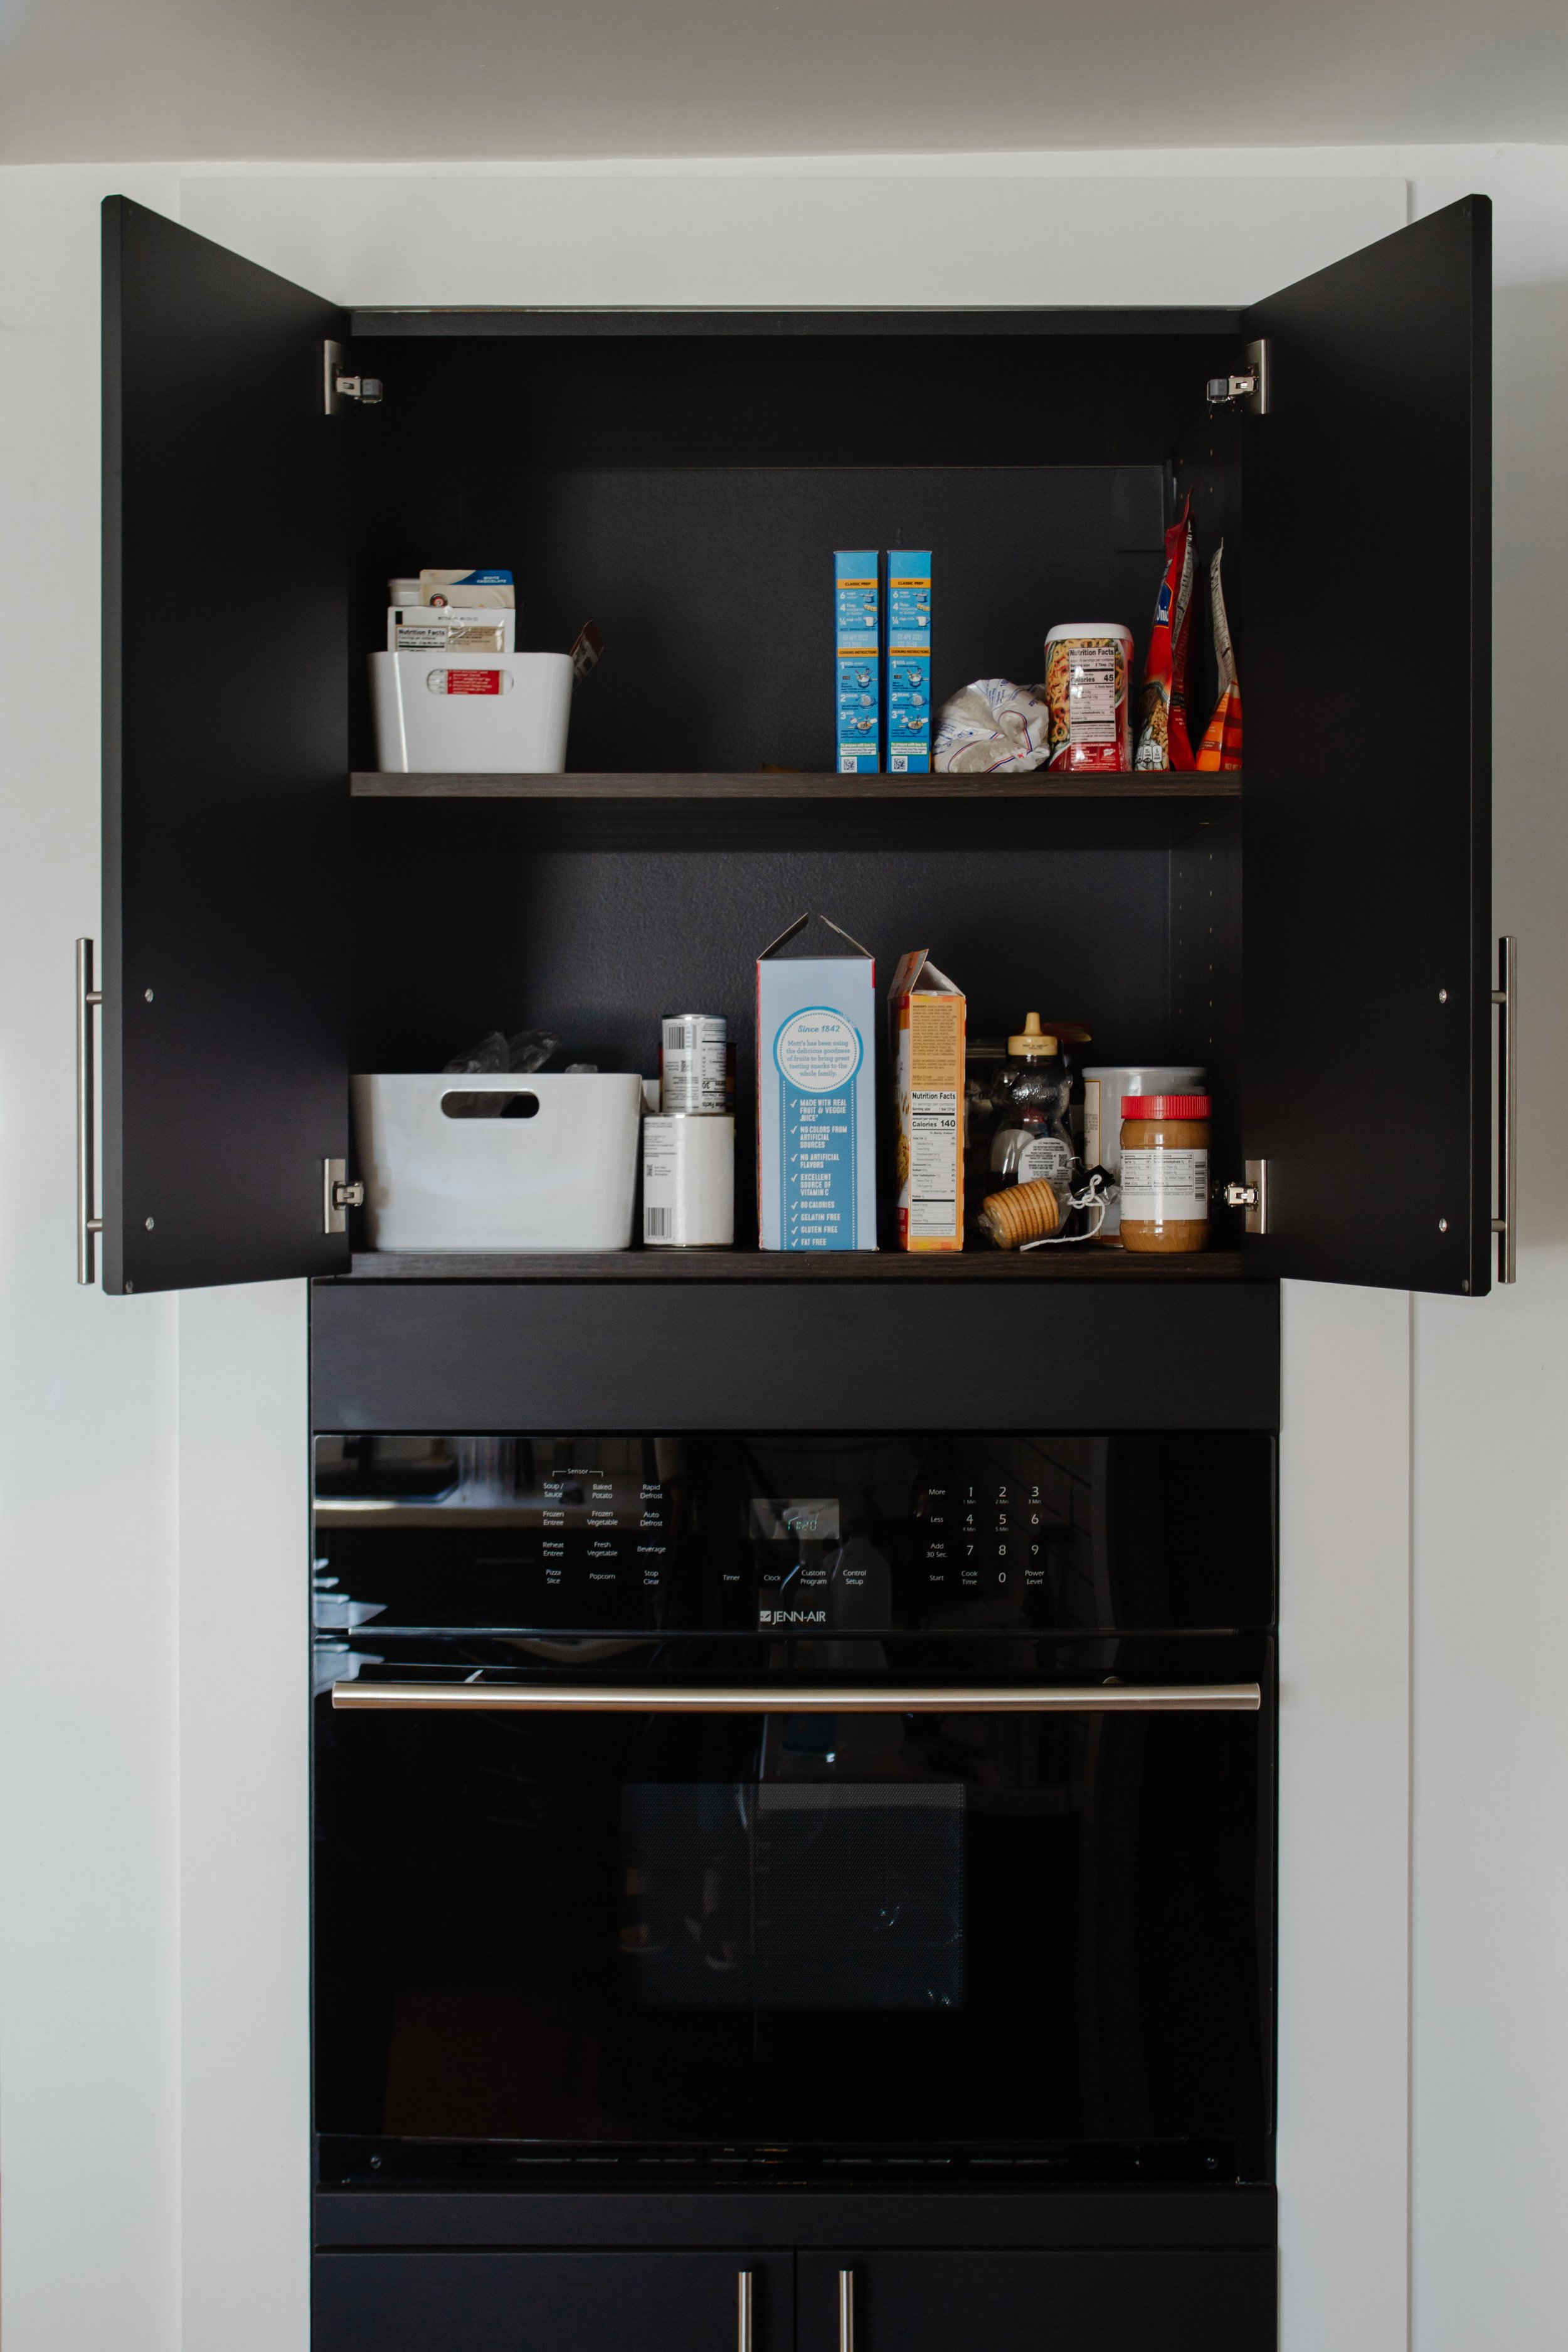 BEFORE | How I organized my kitchen cabinets. Organizational Starter Kit - All the totes, baskets, and storage containers you need to get your house, basement, closets, shelves, and pantry in order. Organization tips by Nadine Stay